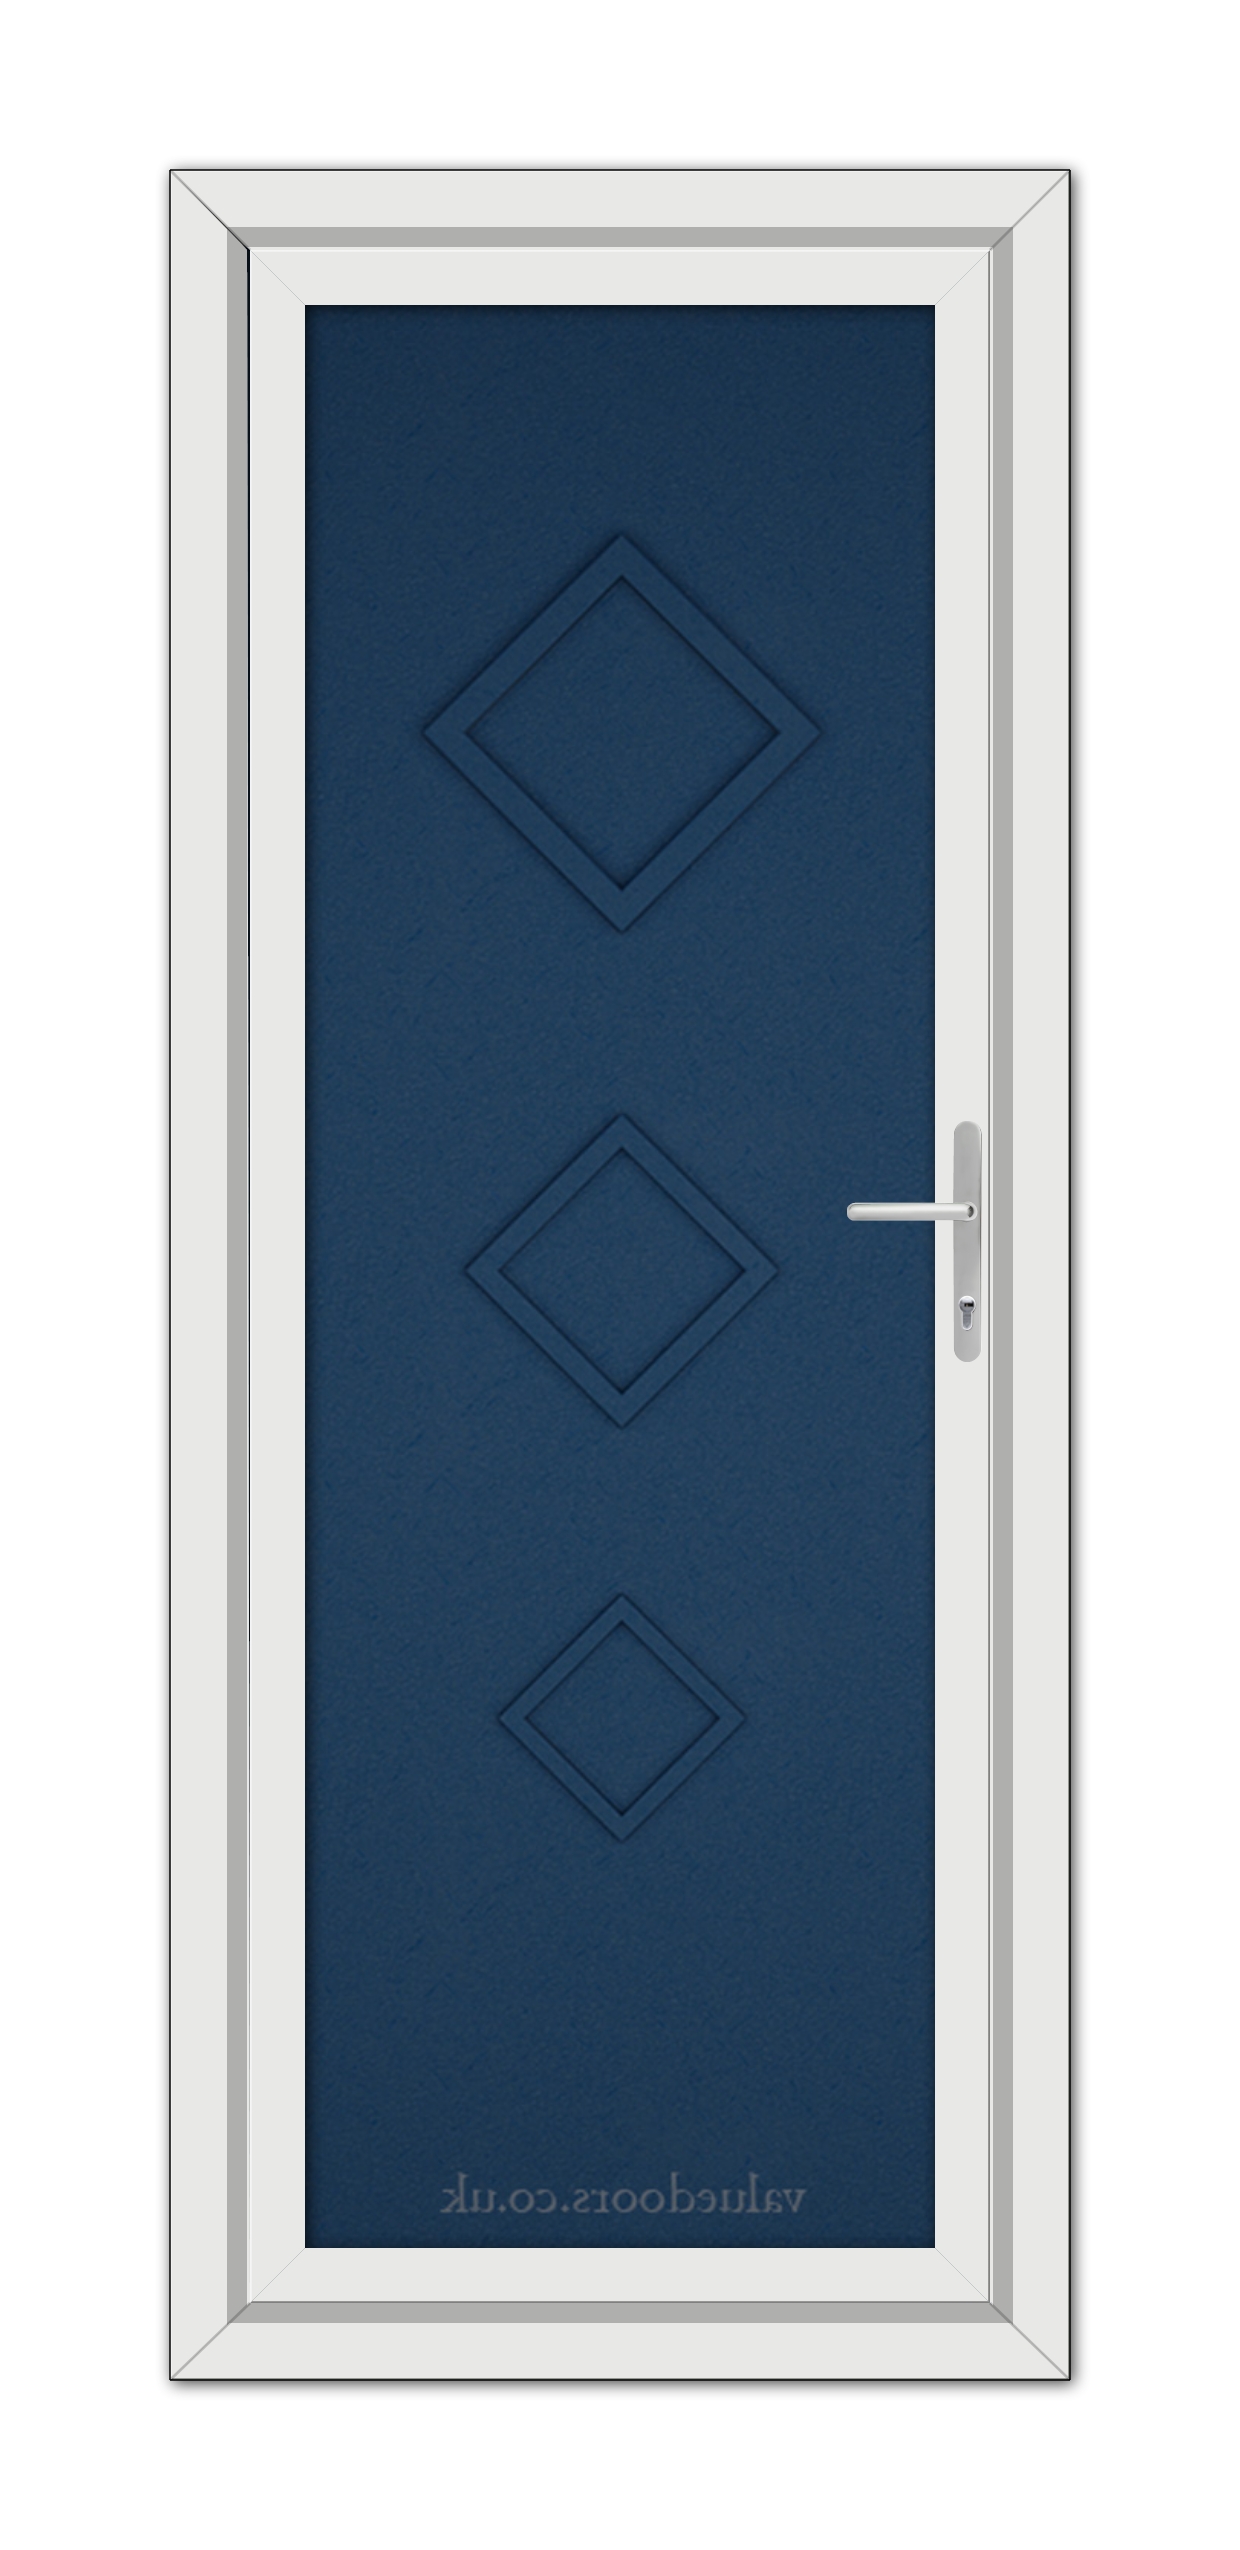 A vertical image of a Blue Modern 5123 Solid uPVC Door with a white frame and dark blue center featuring three diamond-shaped panels and a metallic handle on the right.